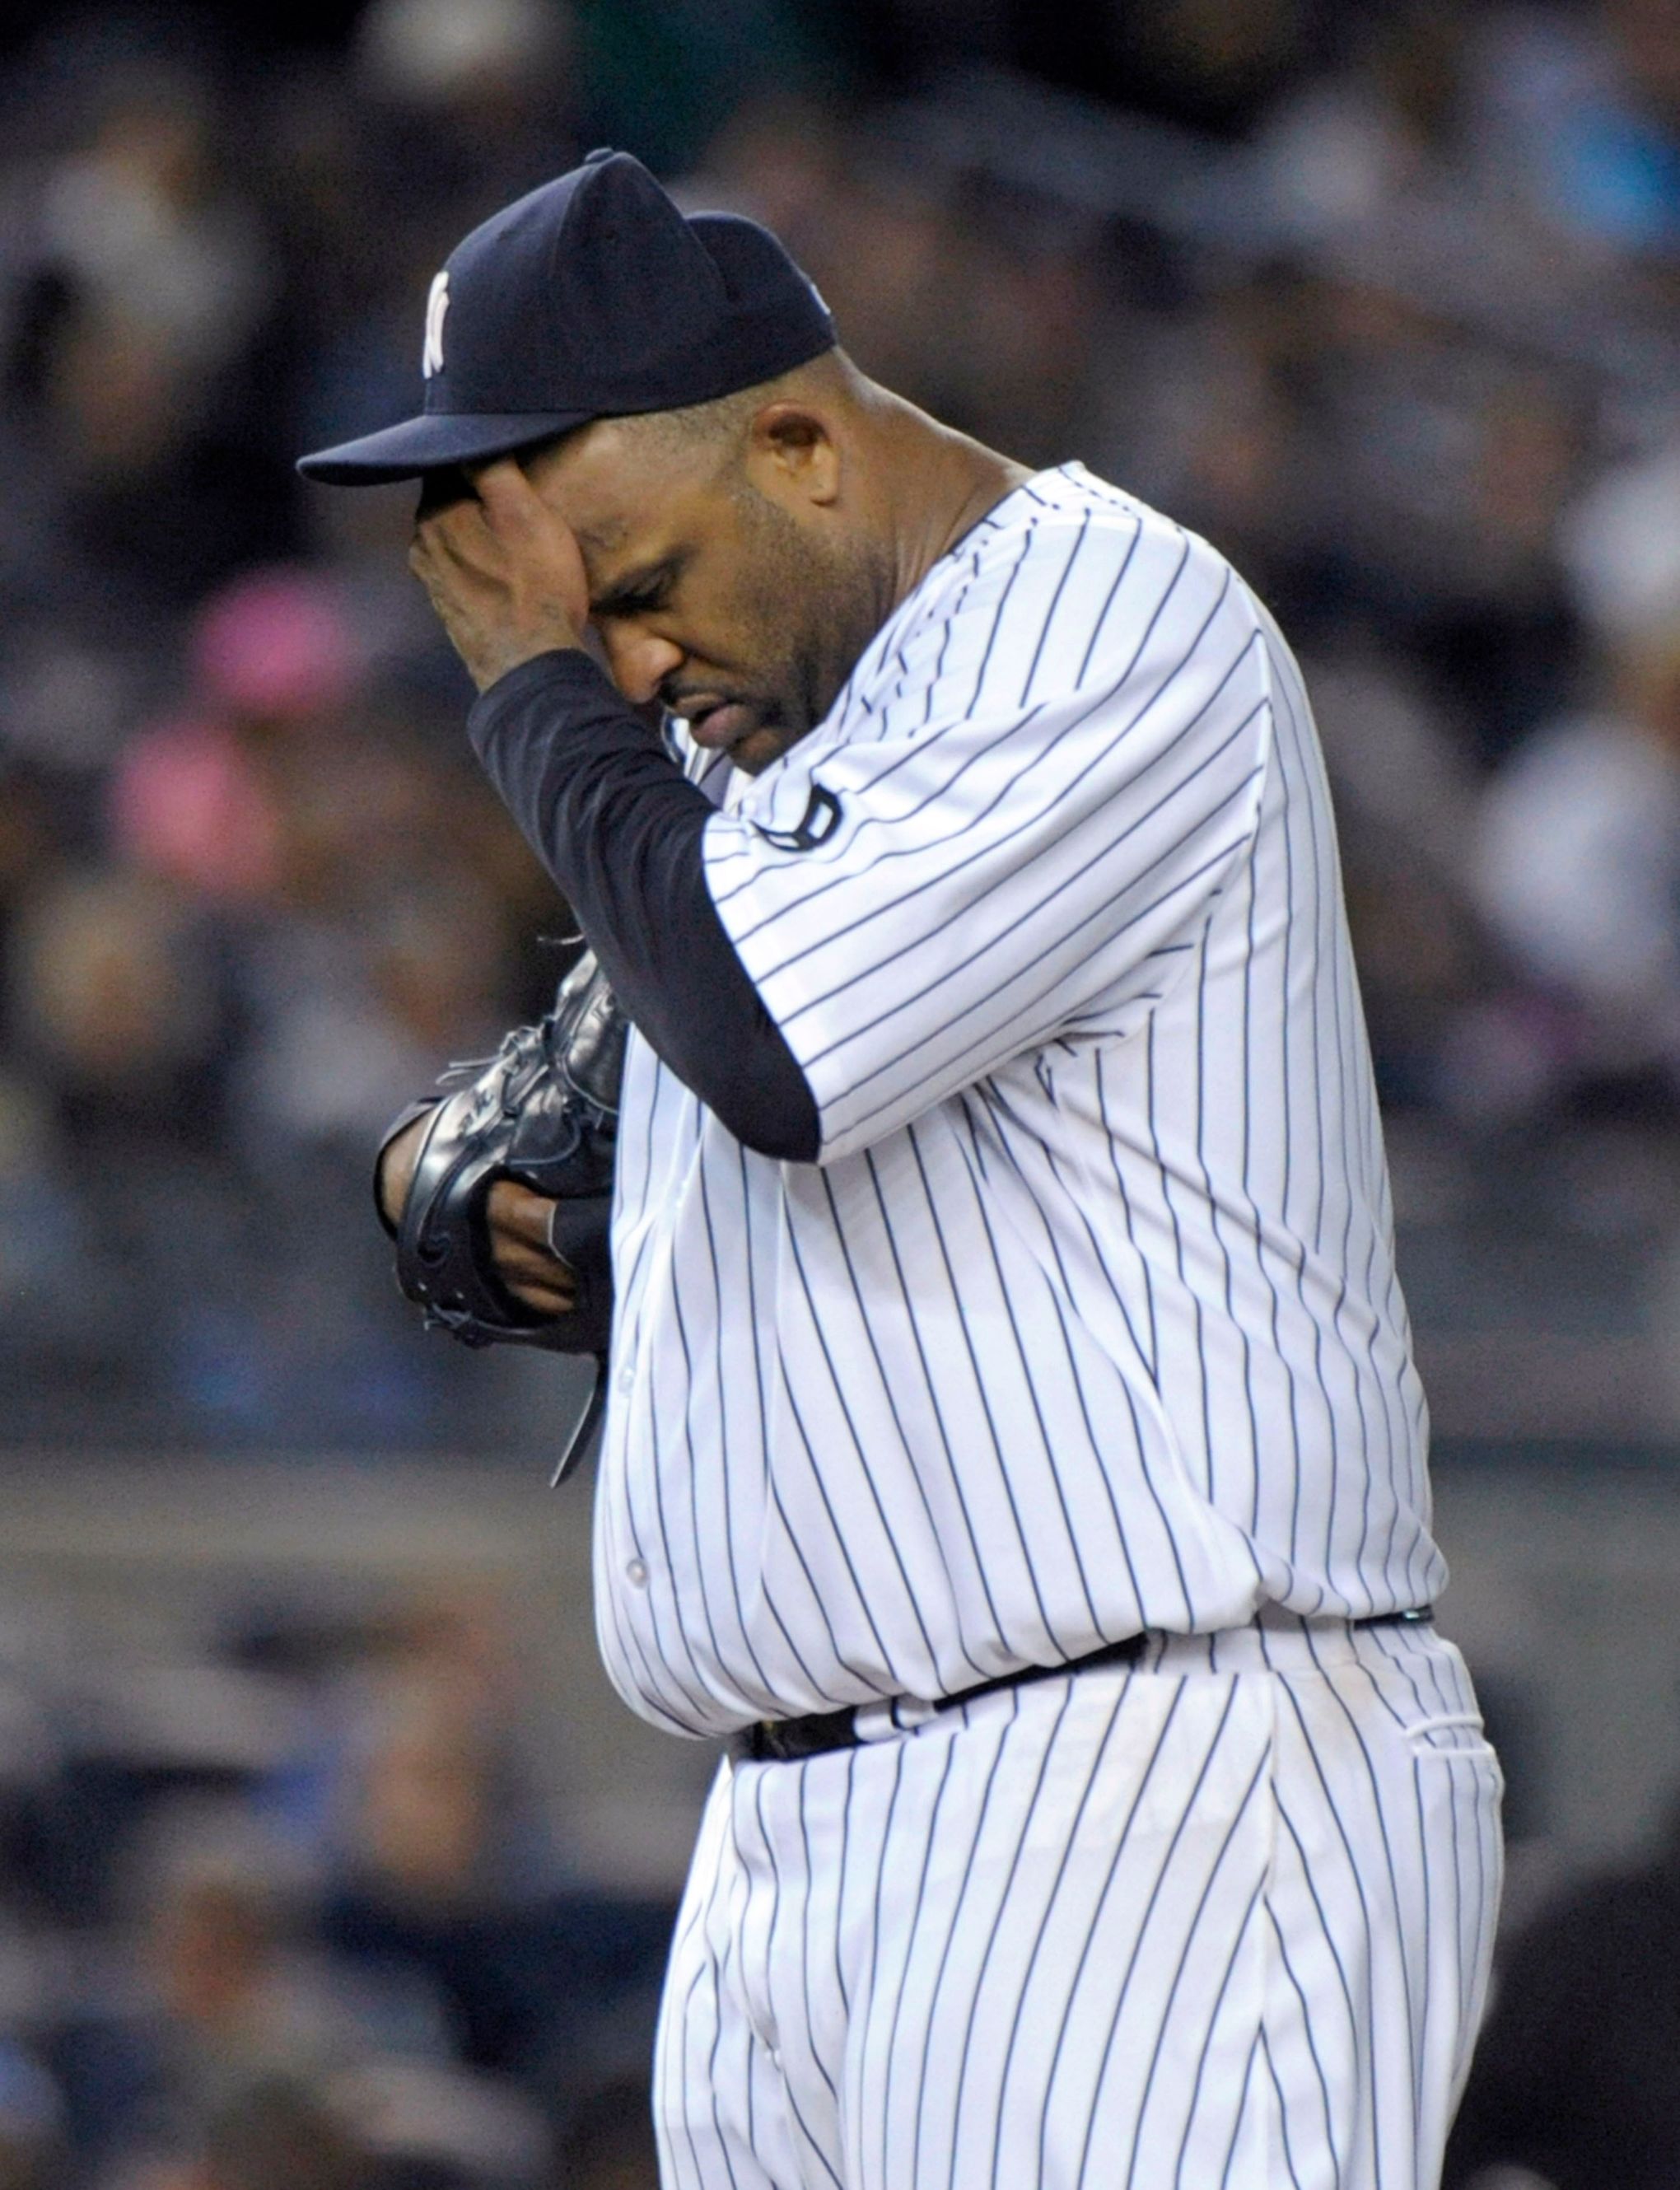 It's been 15 years since CC Sabathia's first start in Milwaukee